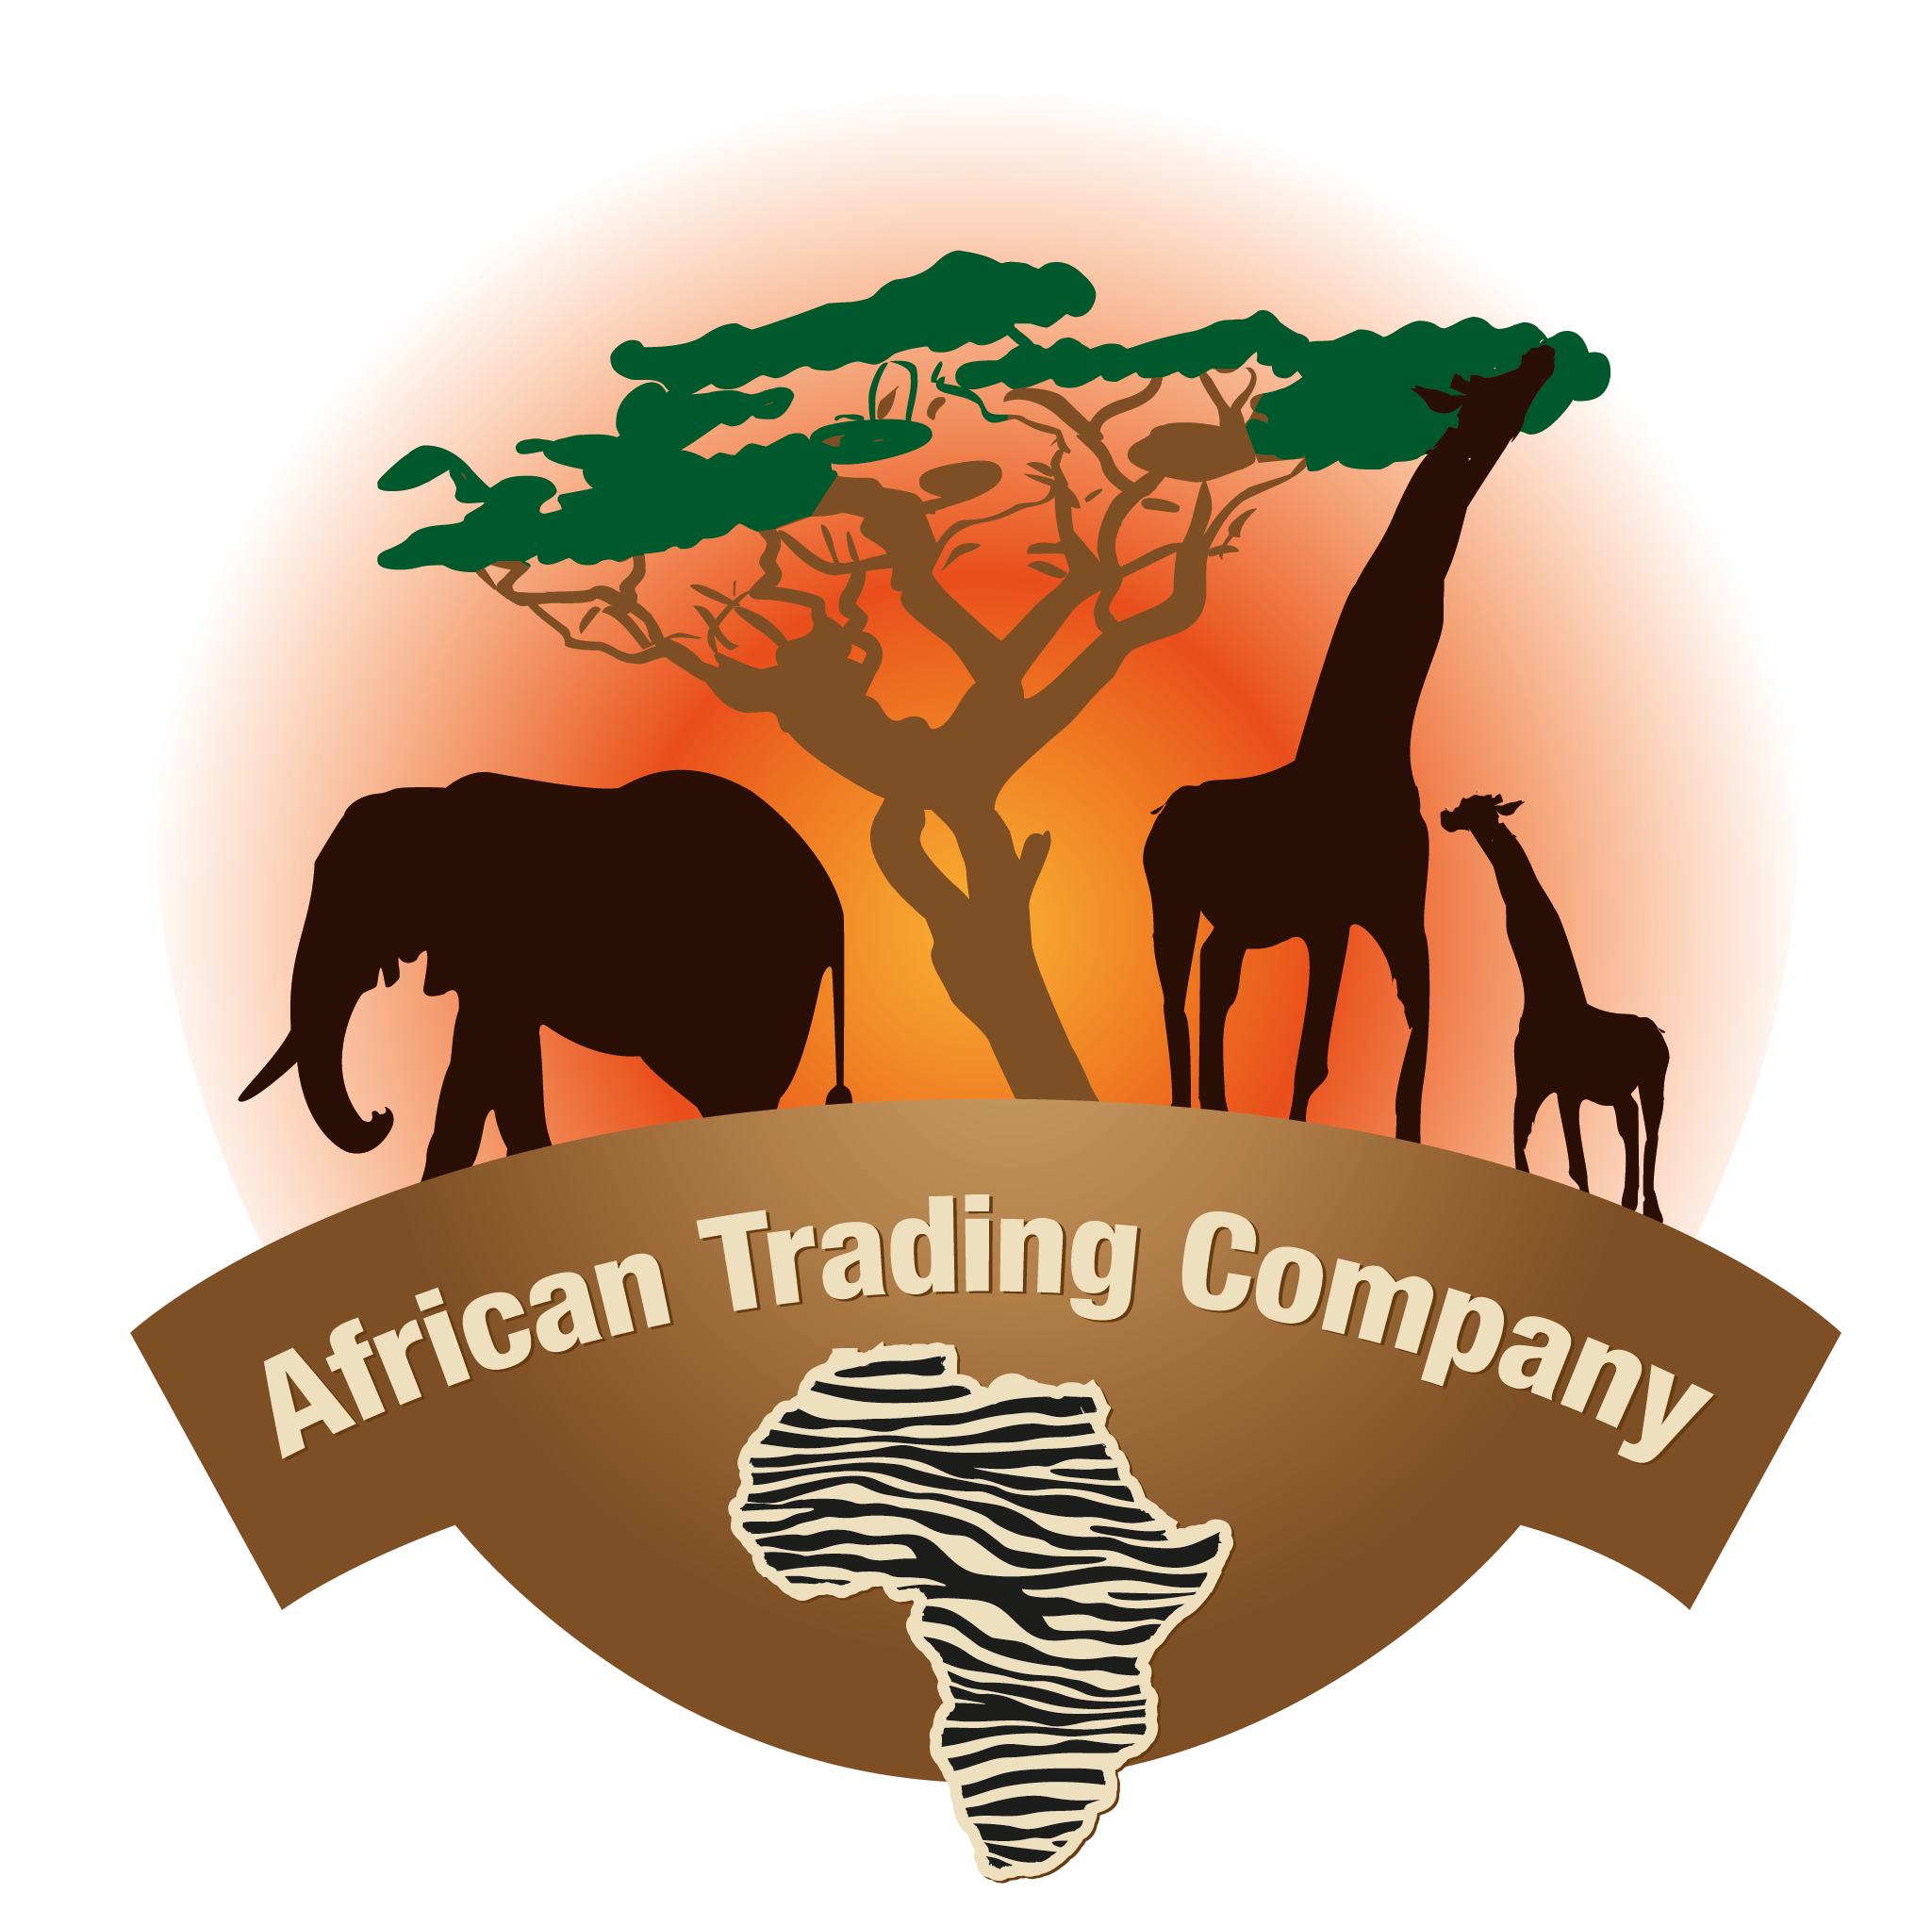 African Trading Company